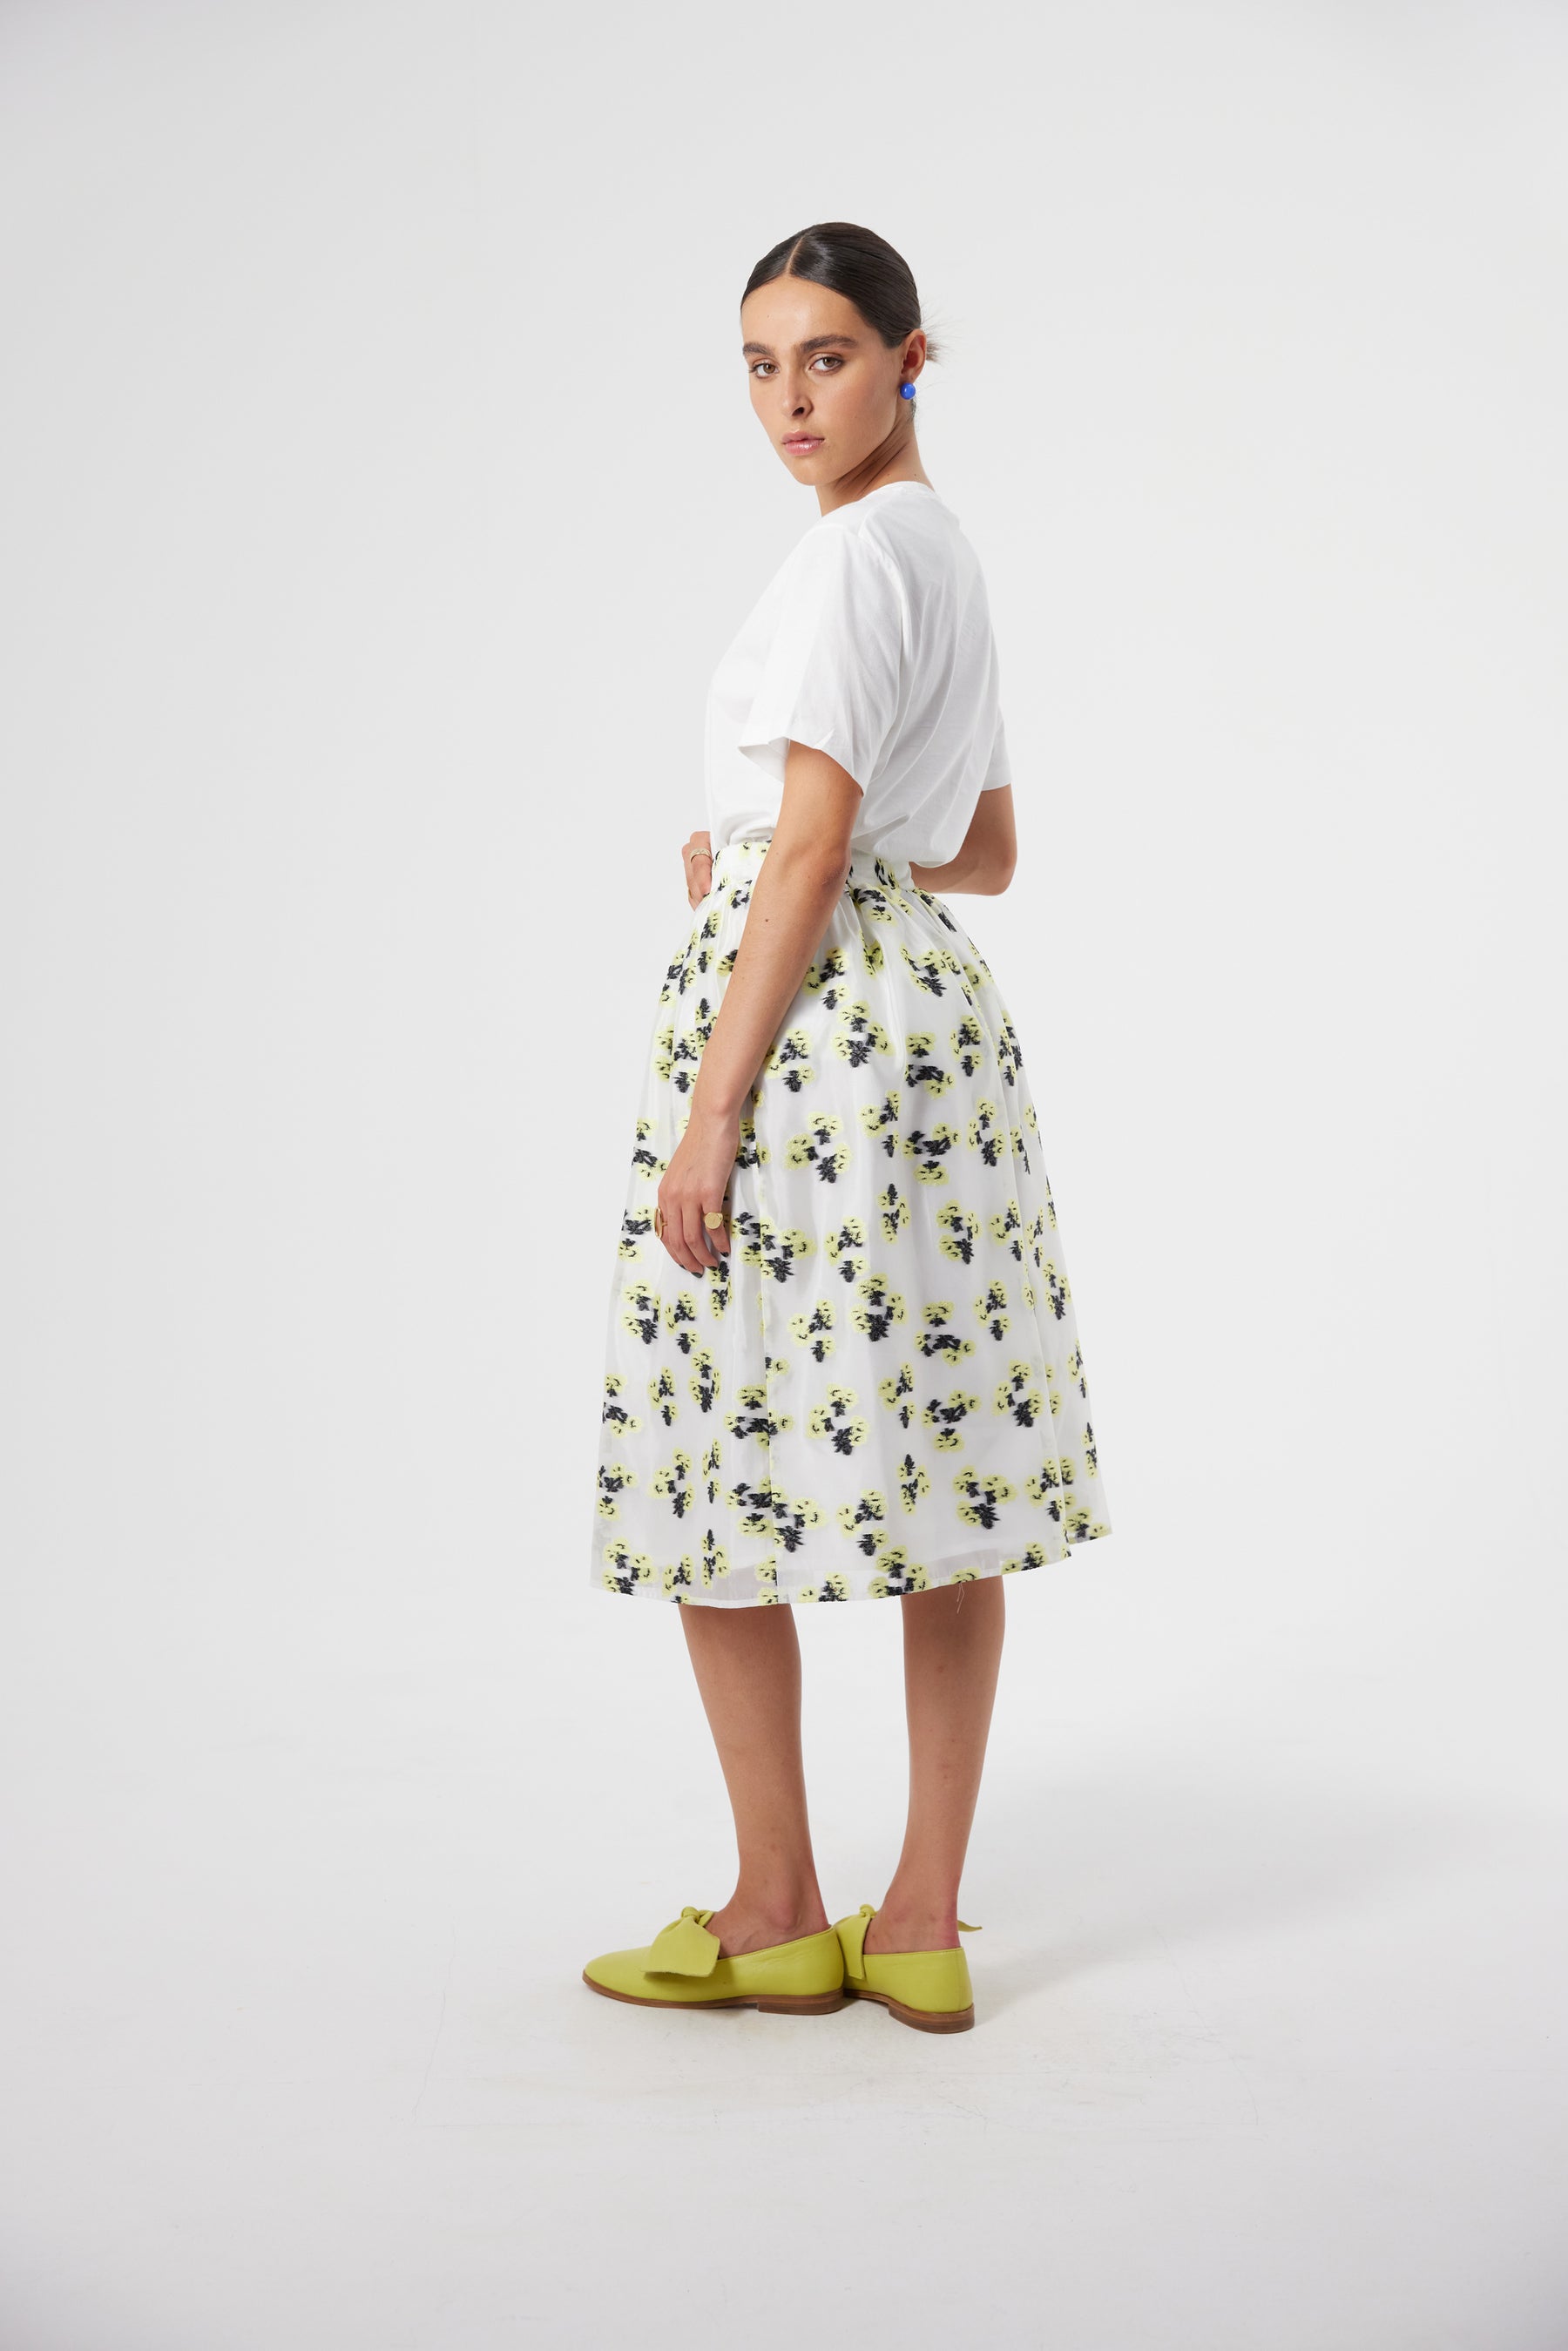 Orso skirt in Firefly embroidery